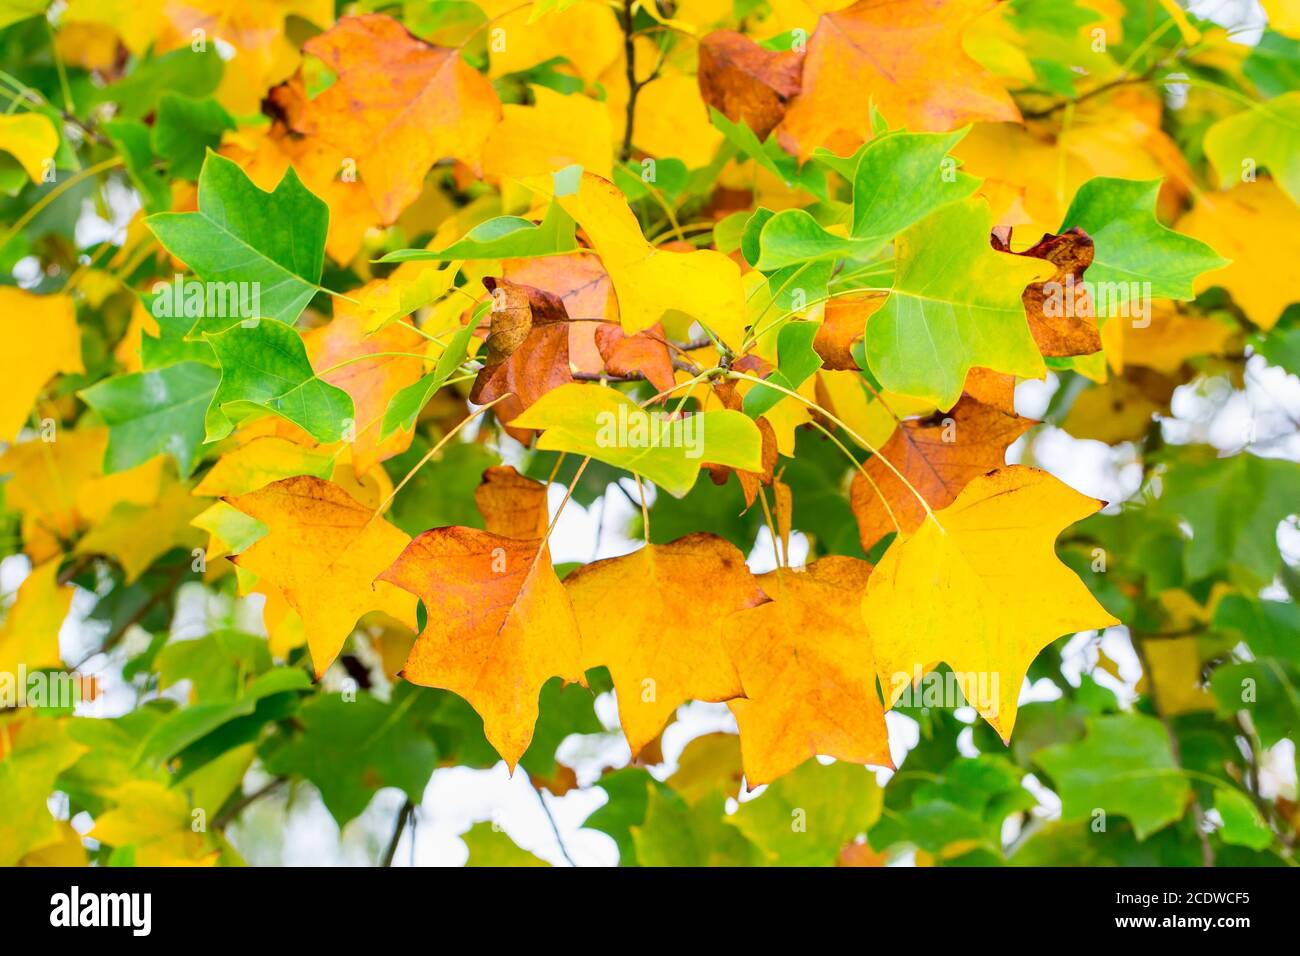 Yellow and green leaves of tree in autumn Stock Photo